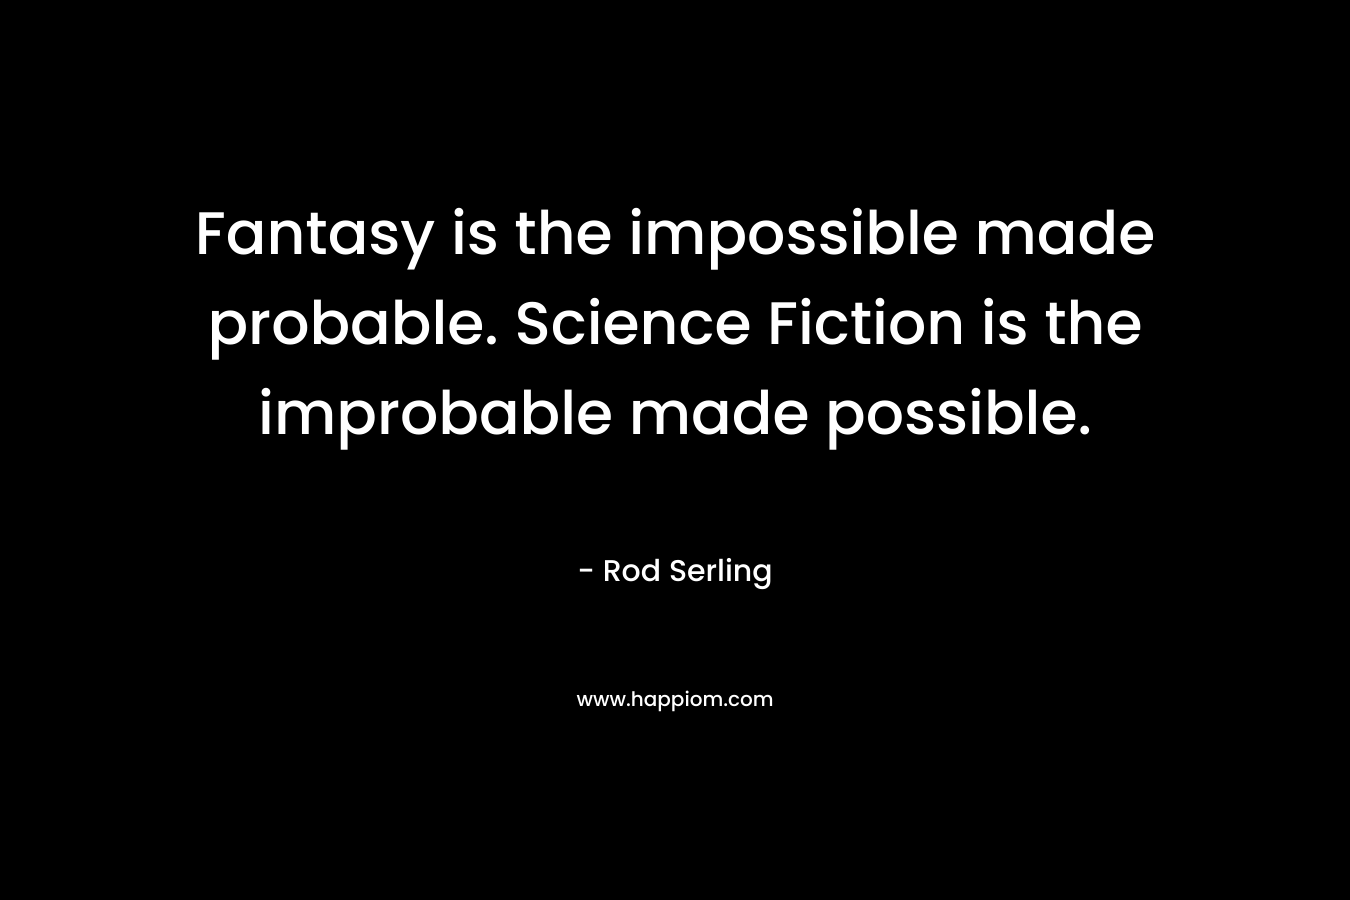 Fantasy is the impossible made probable. Science Fiction is the improbable made possible.